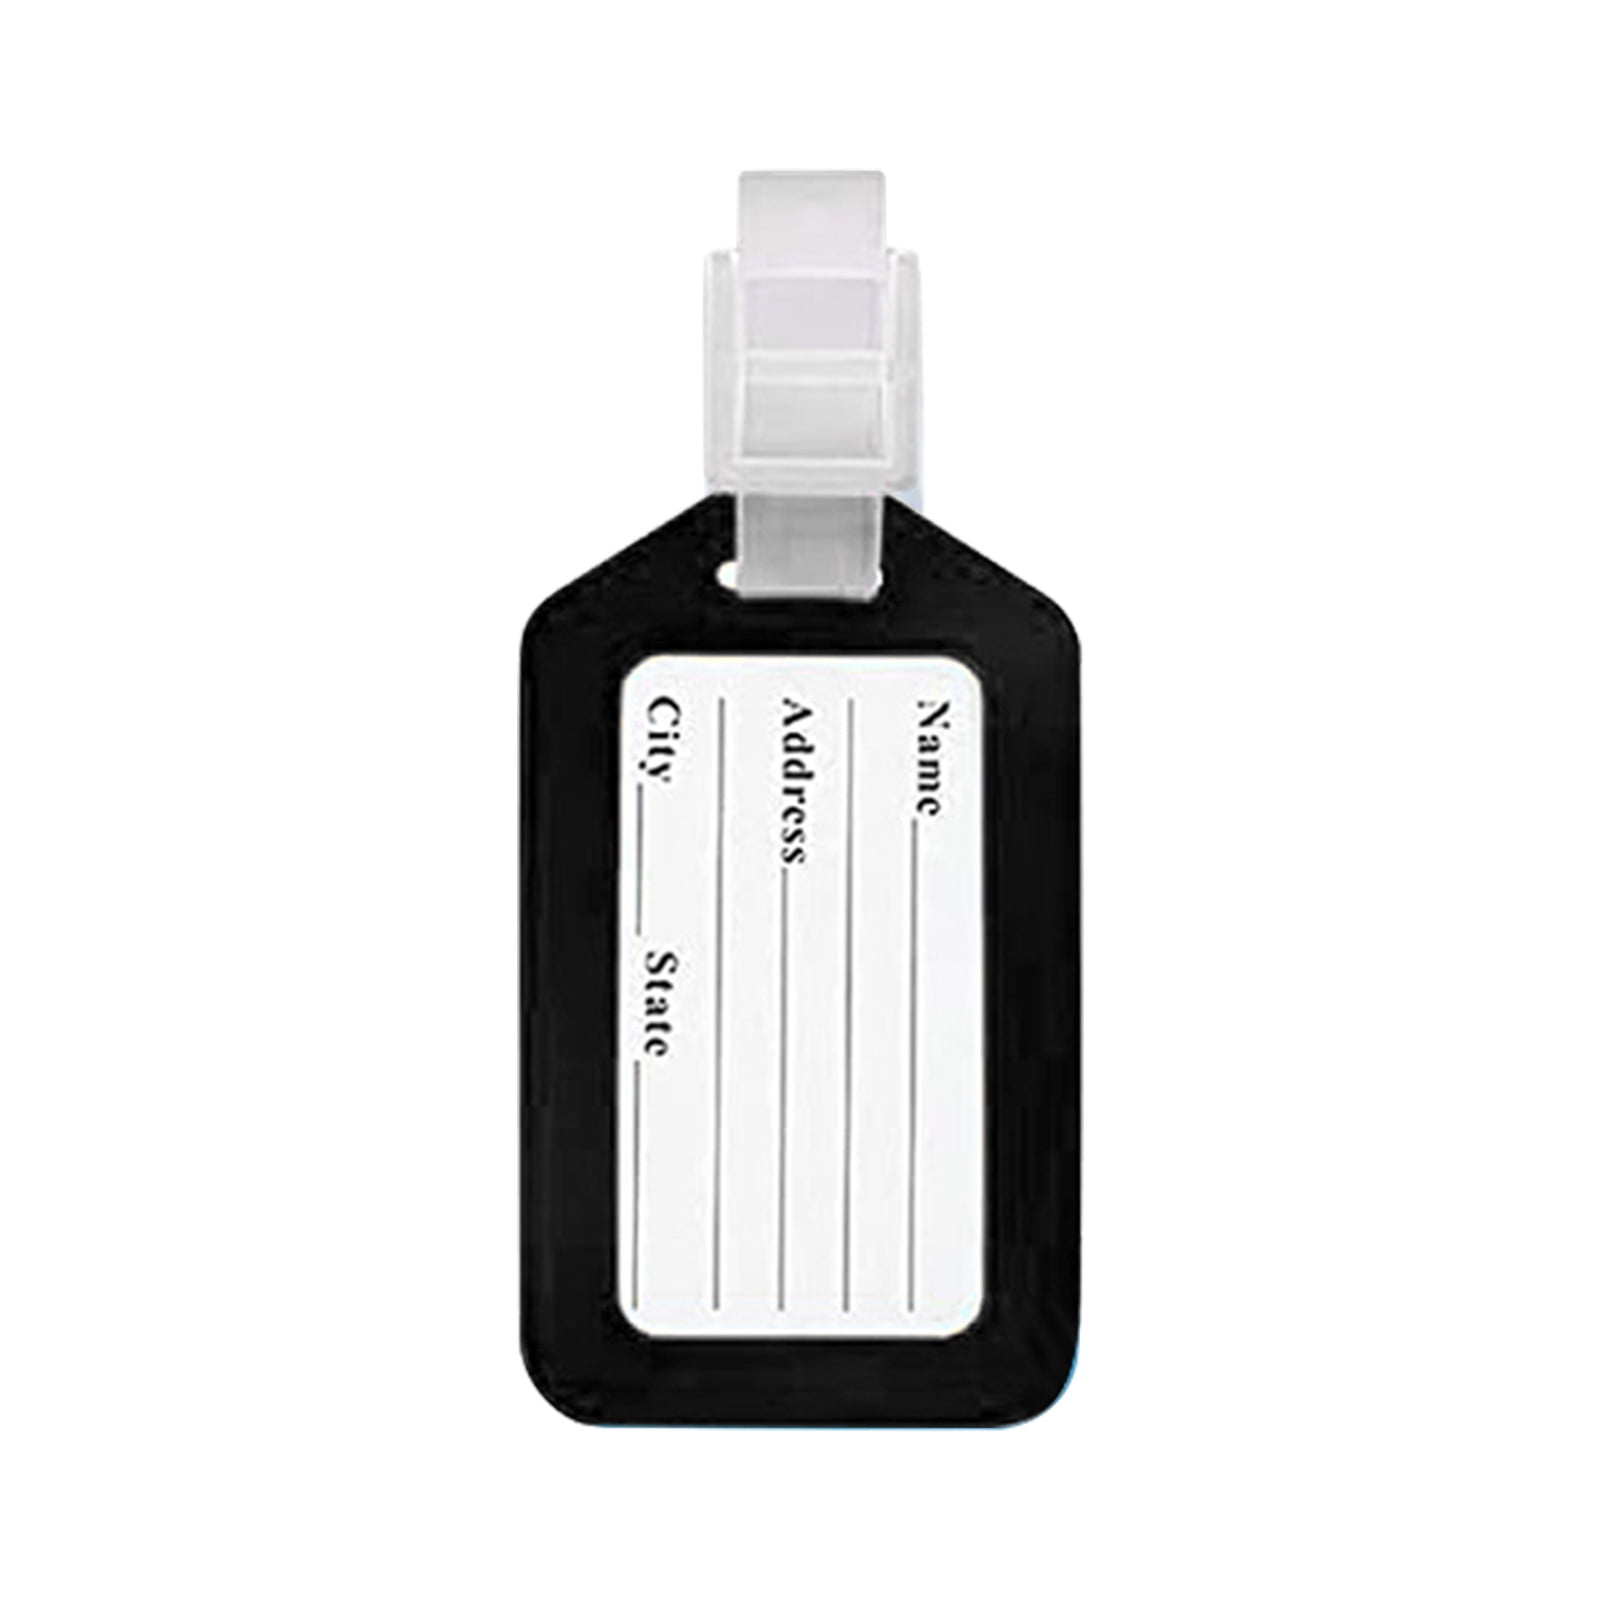 Outdoor 1 Pcs Luggage Tags 3.4x1.9 Inches Luggage Identifiers With Name Tags Travel Accessories Waterproof ID Tags Airplane Suitcase Labels - Walmart.com